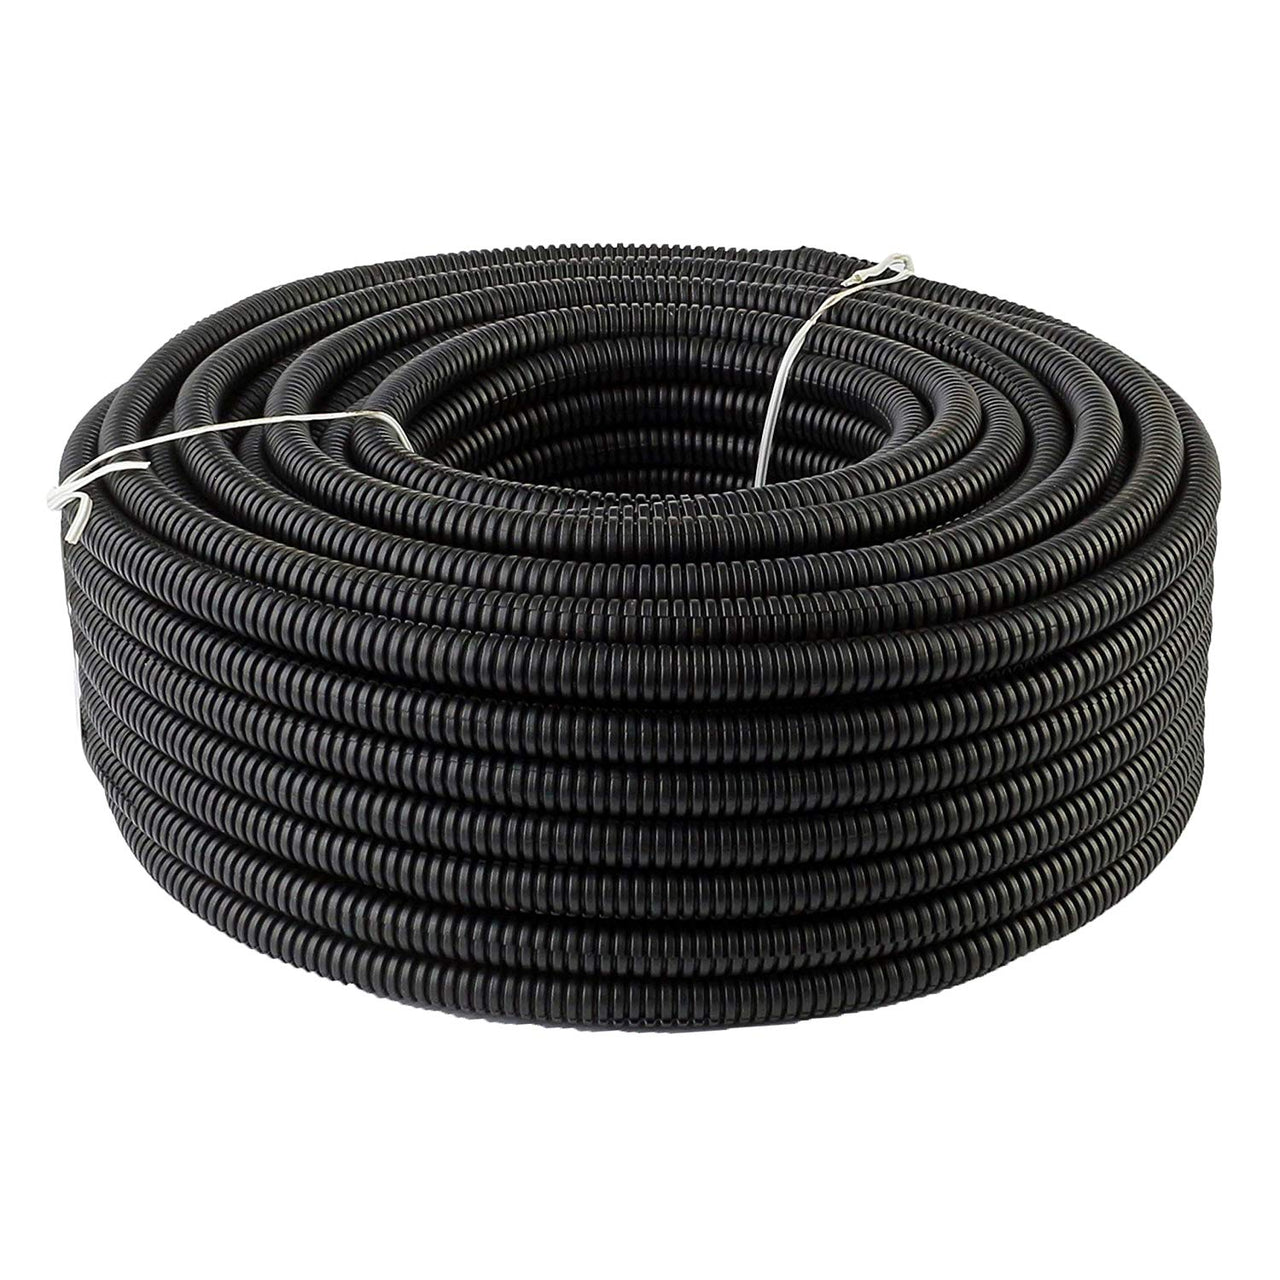 1/2" Stereo Tubing Wire Cover Black Split Loom Flexible Good Quality - (100' Ft)